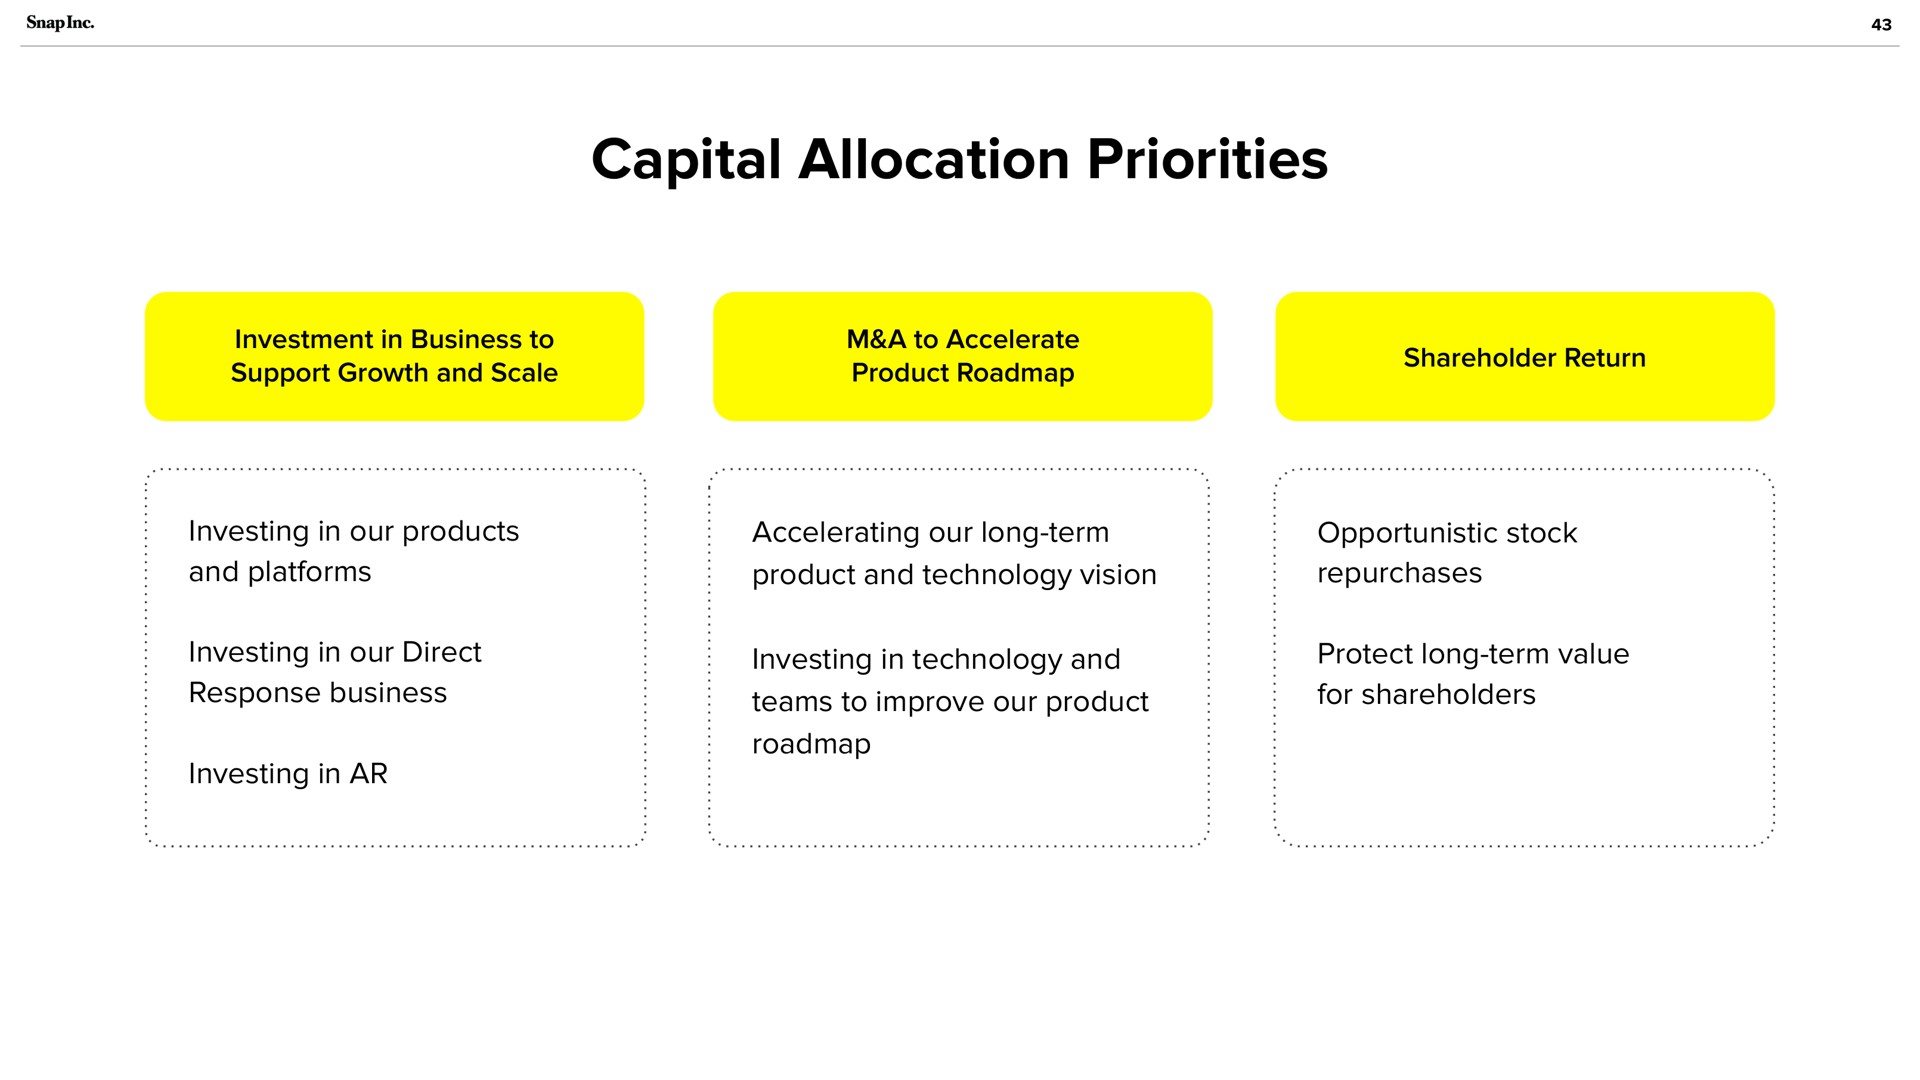 capital allocation priorities and platforms product and technology vision response business teams to improve our product repurchases for shareholders | Snap Inc